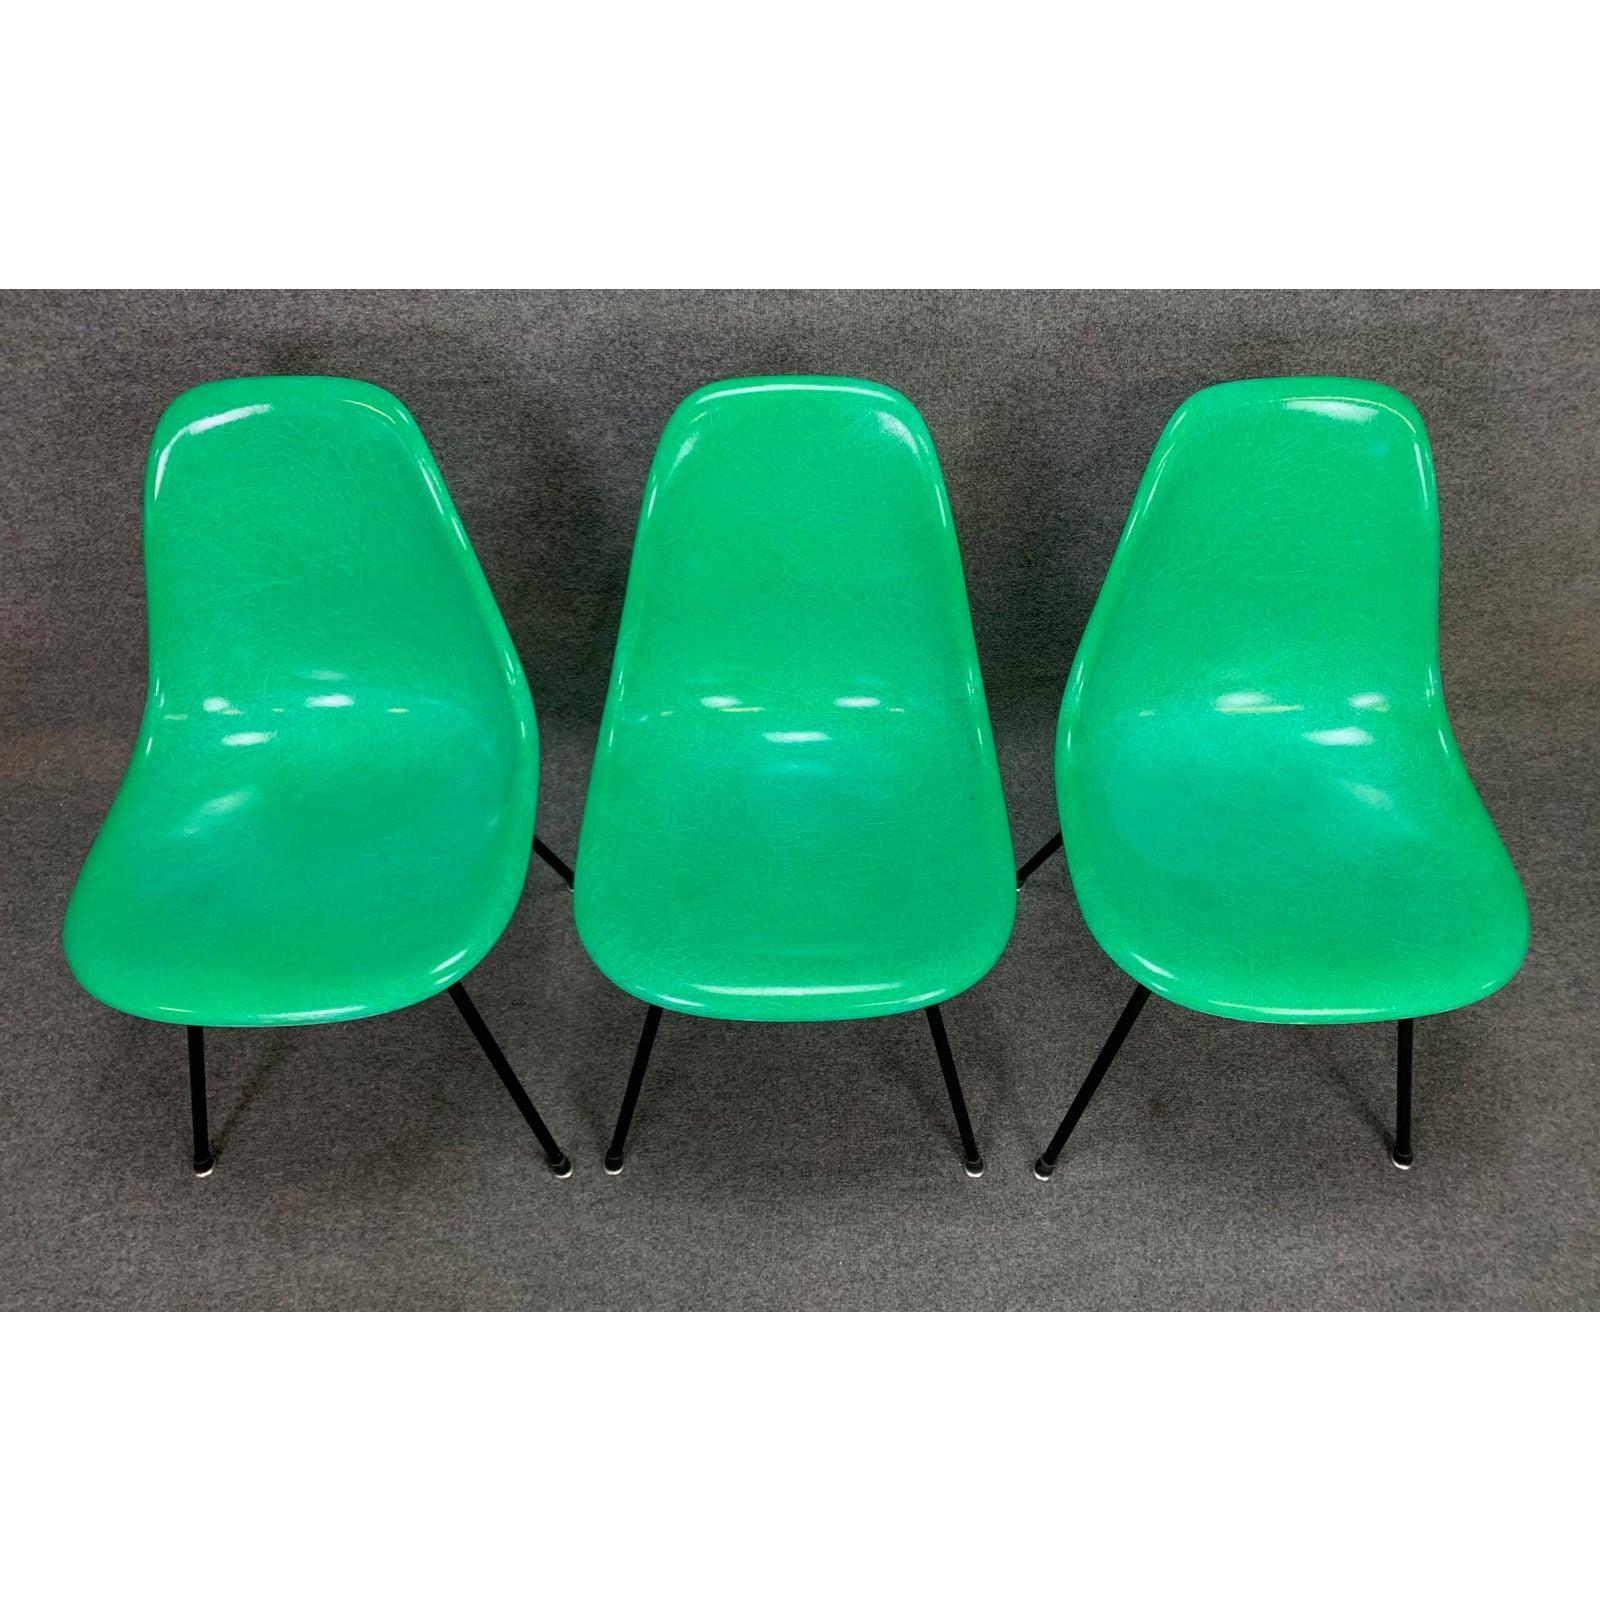 Molded Set of 6 Midcentury DSX Fiberglass Chairs by Charles Eames for Herman Miller